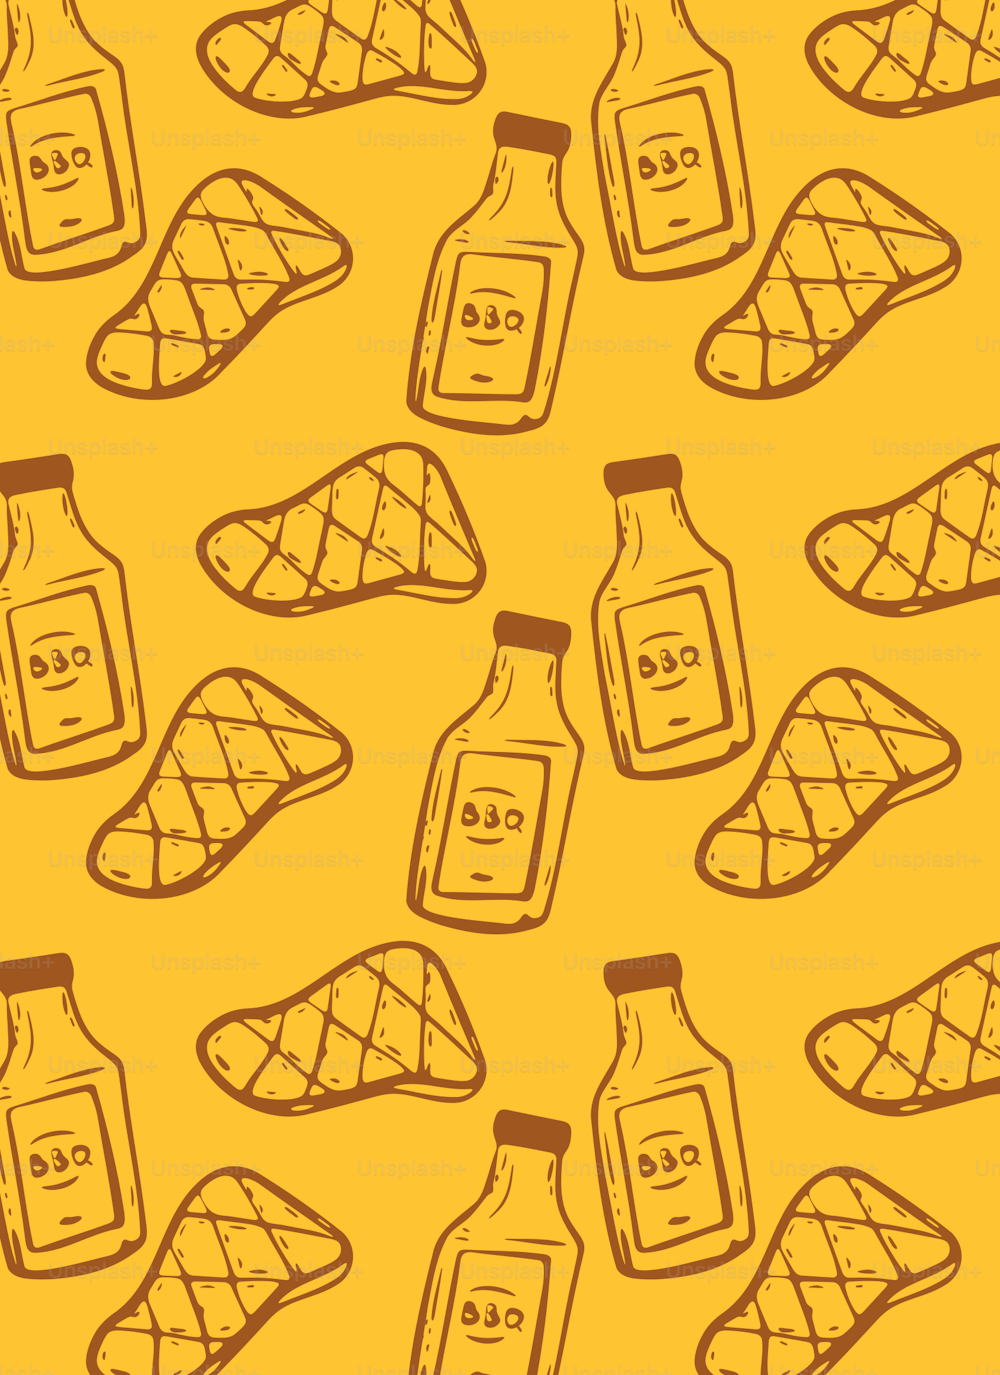 a yellow background with a pattern of bottles and slices of bread